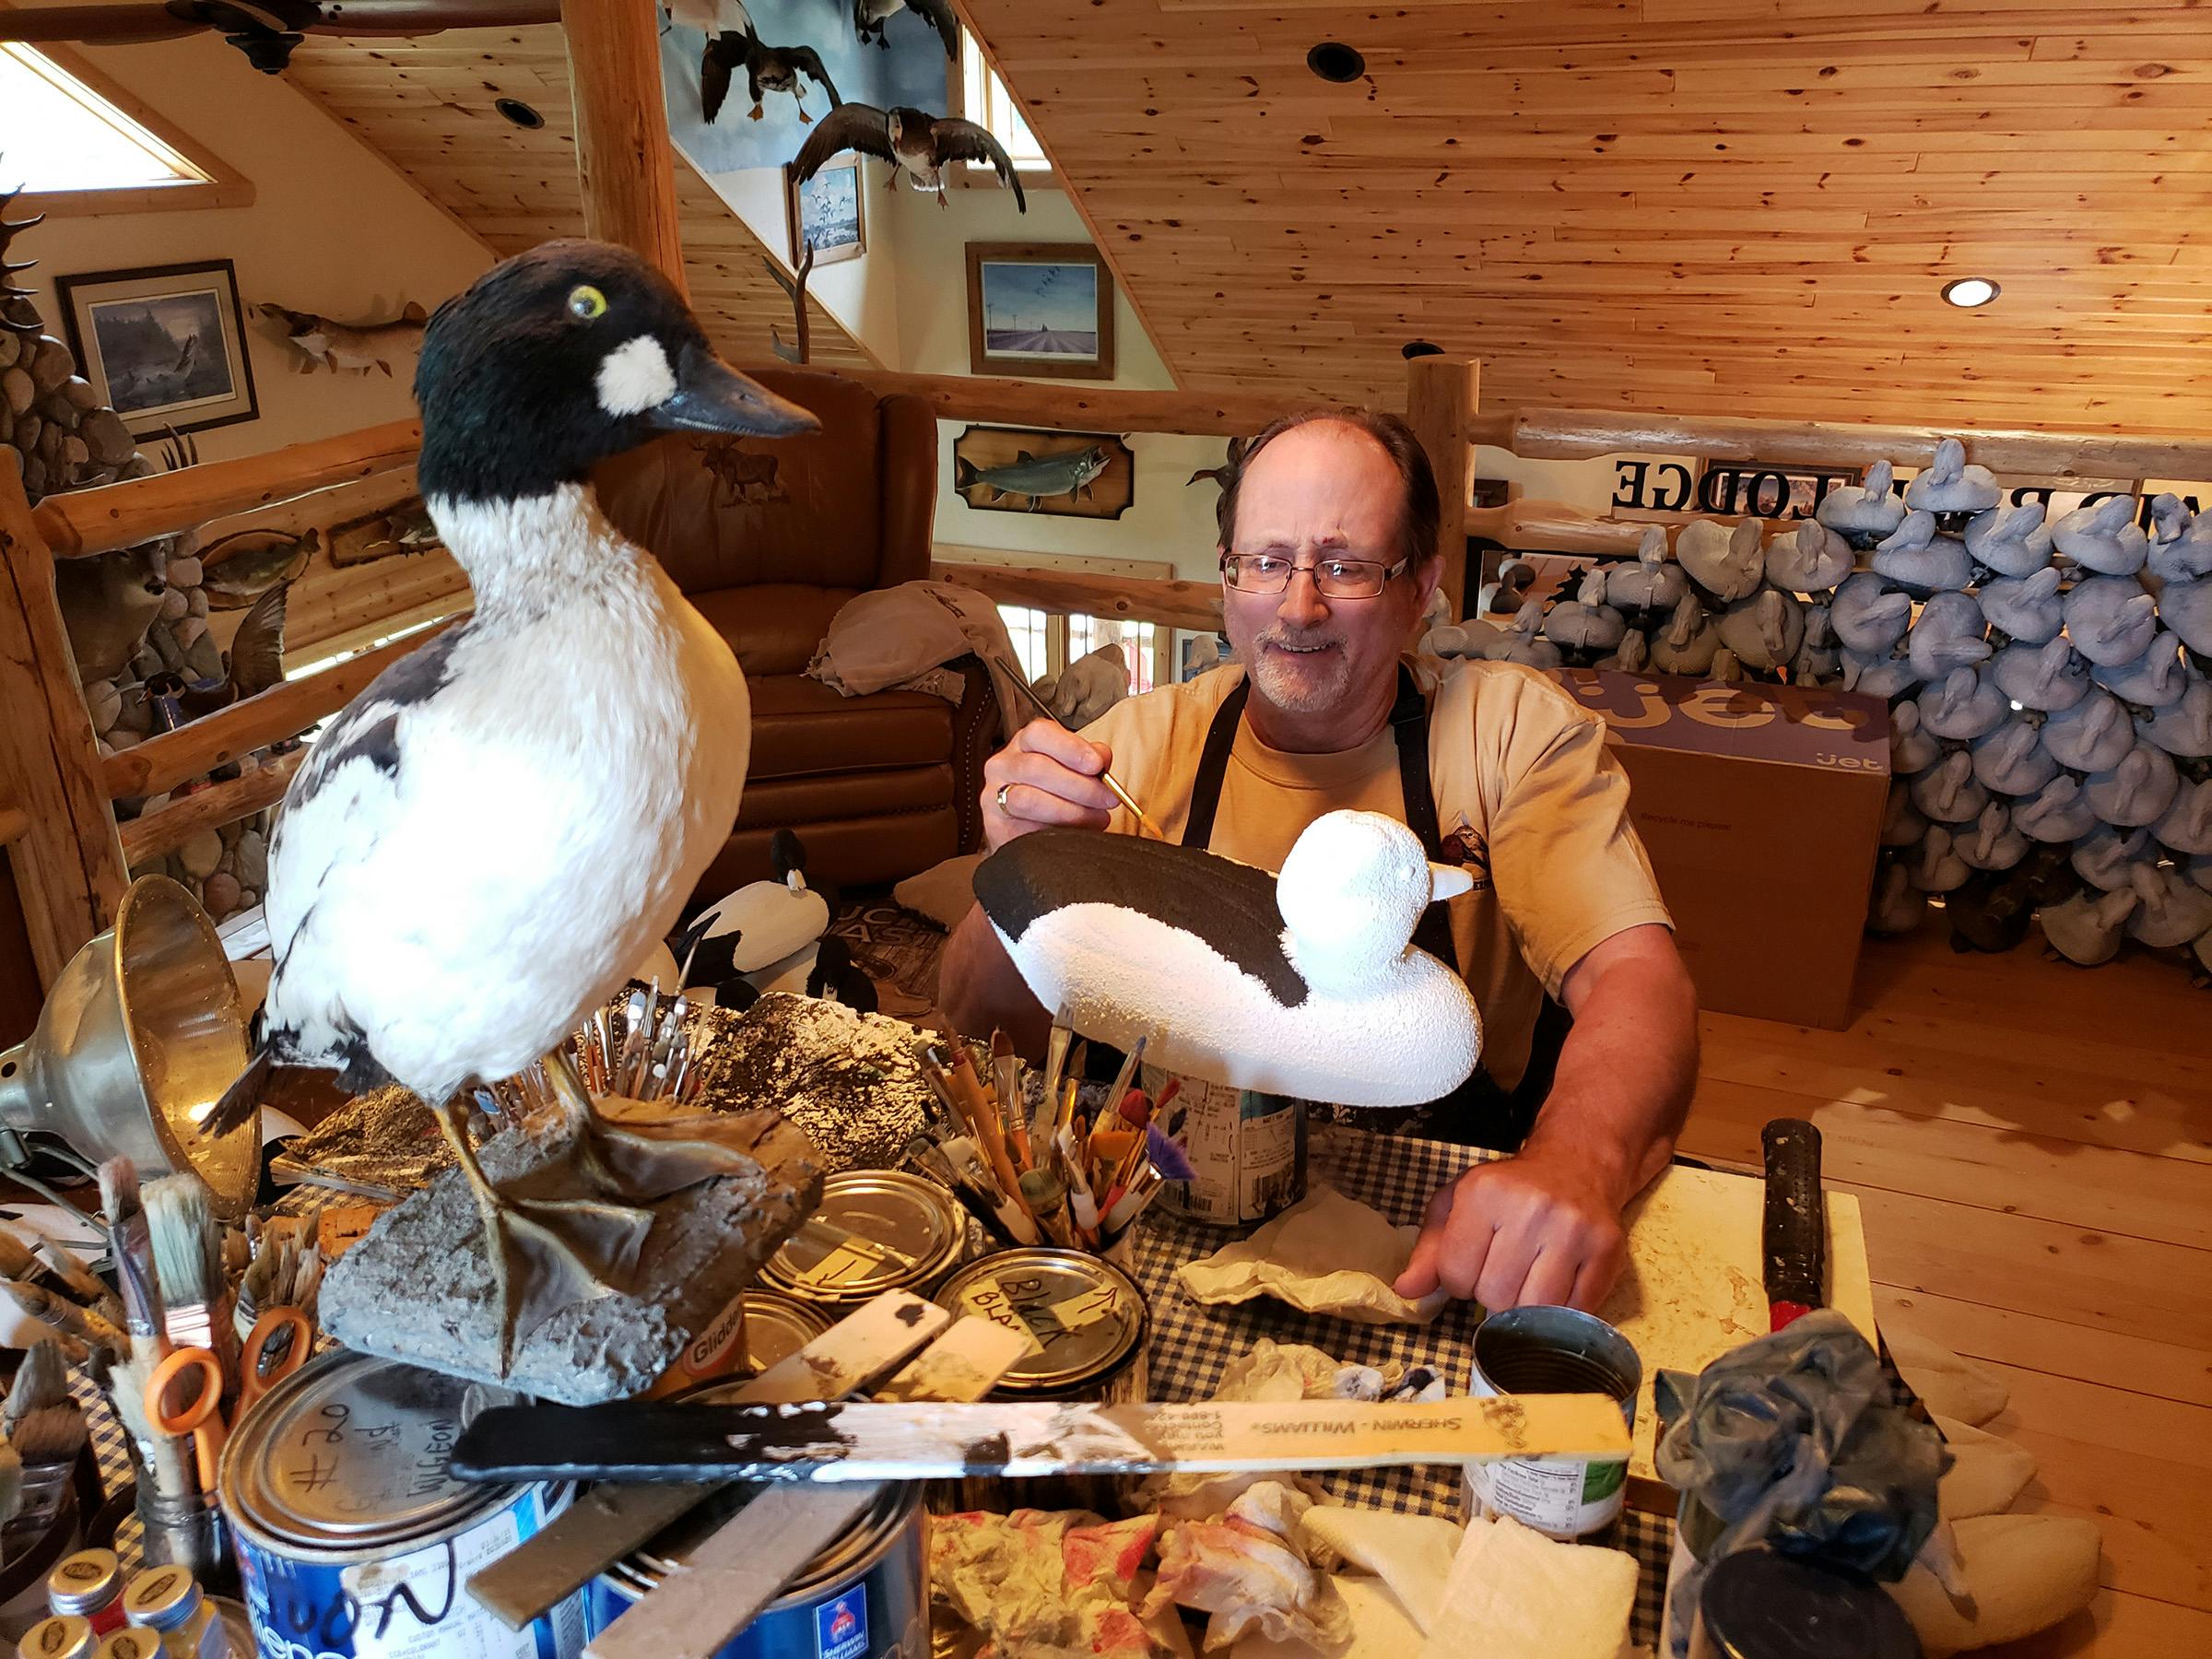 Minnesotan has a real thing for restoring duck decoys